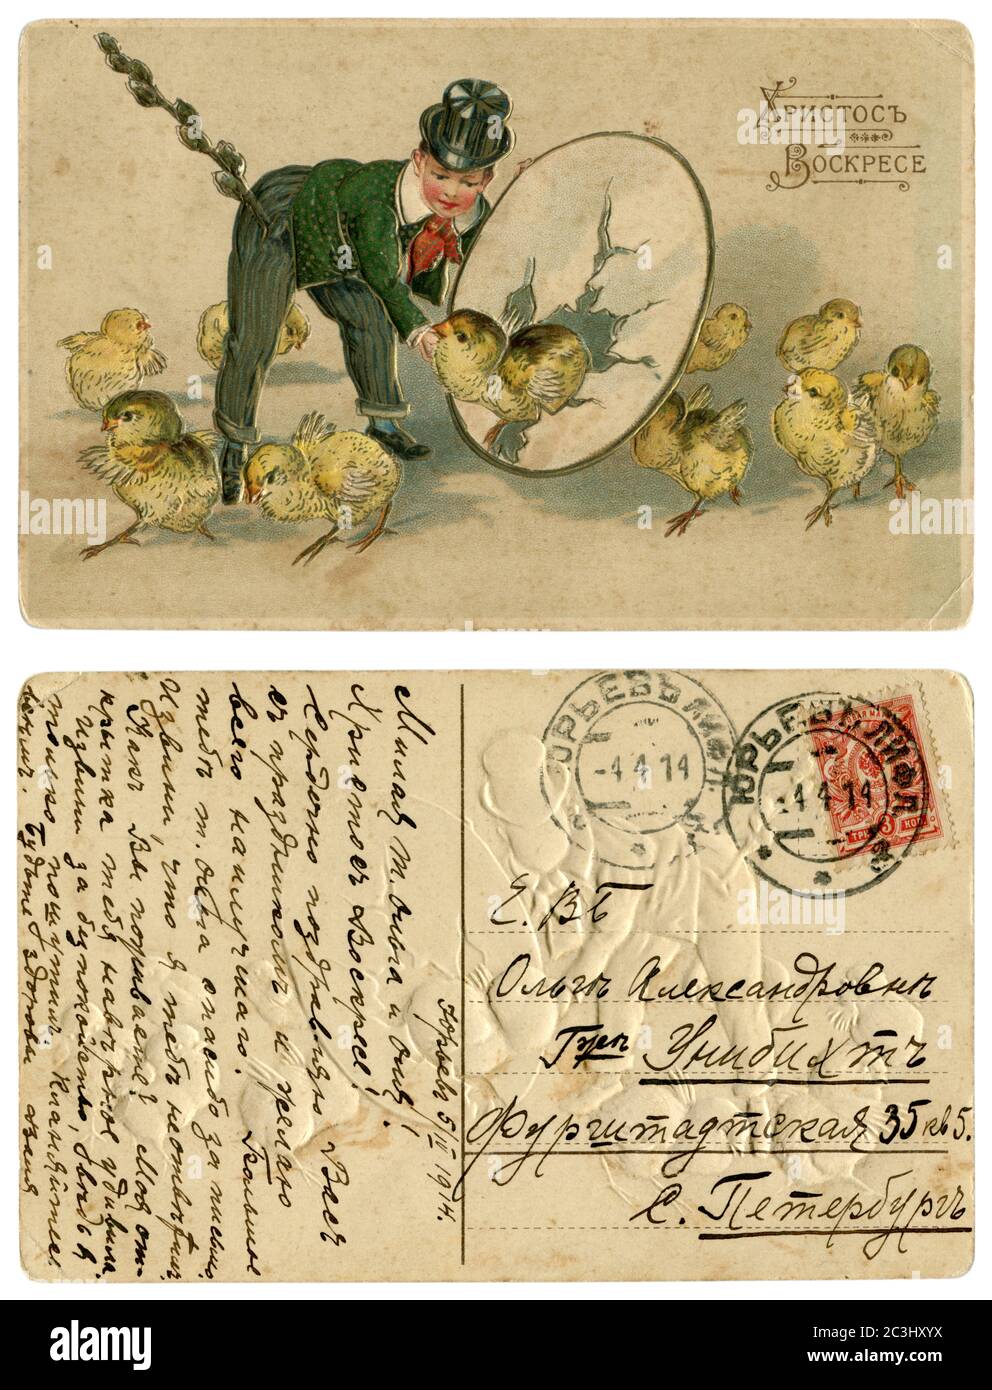 Russian Empire historical postcard: Christian Easter, 'Christ is Risen', a Man in a suit with a willow in his pocket leads a dance of chickens. 1914 Stock Photo